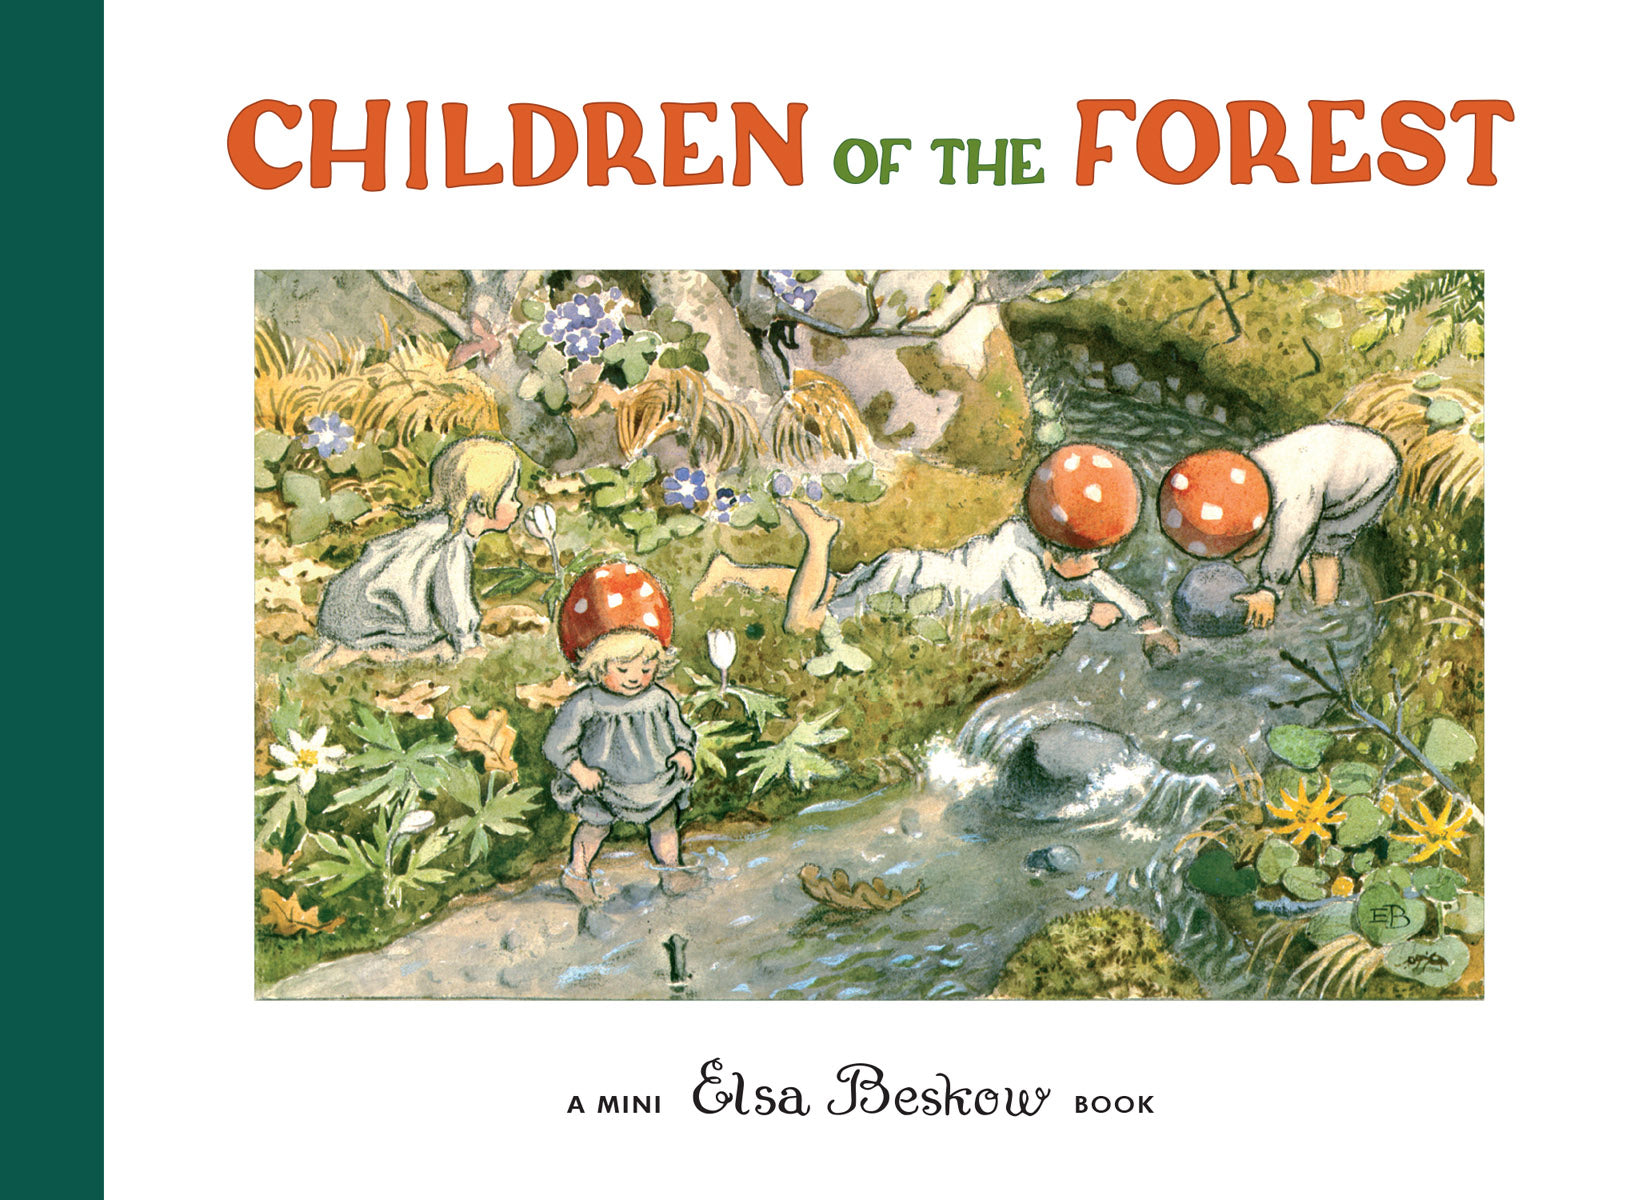 Children of the Forest Mini Edition by Elsa Beskow